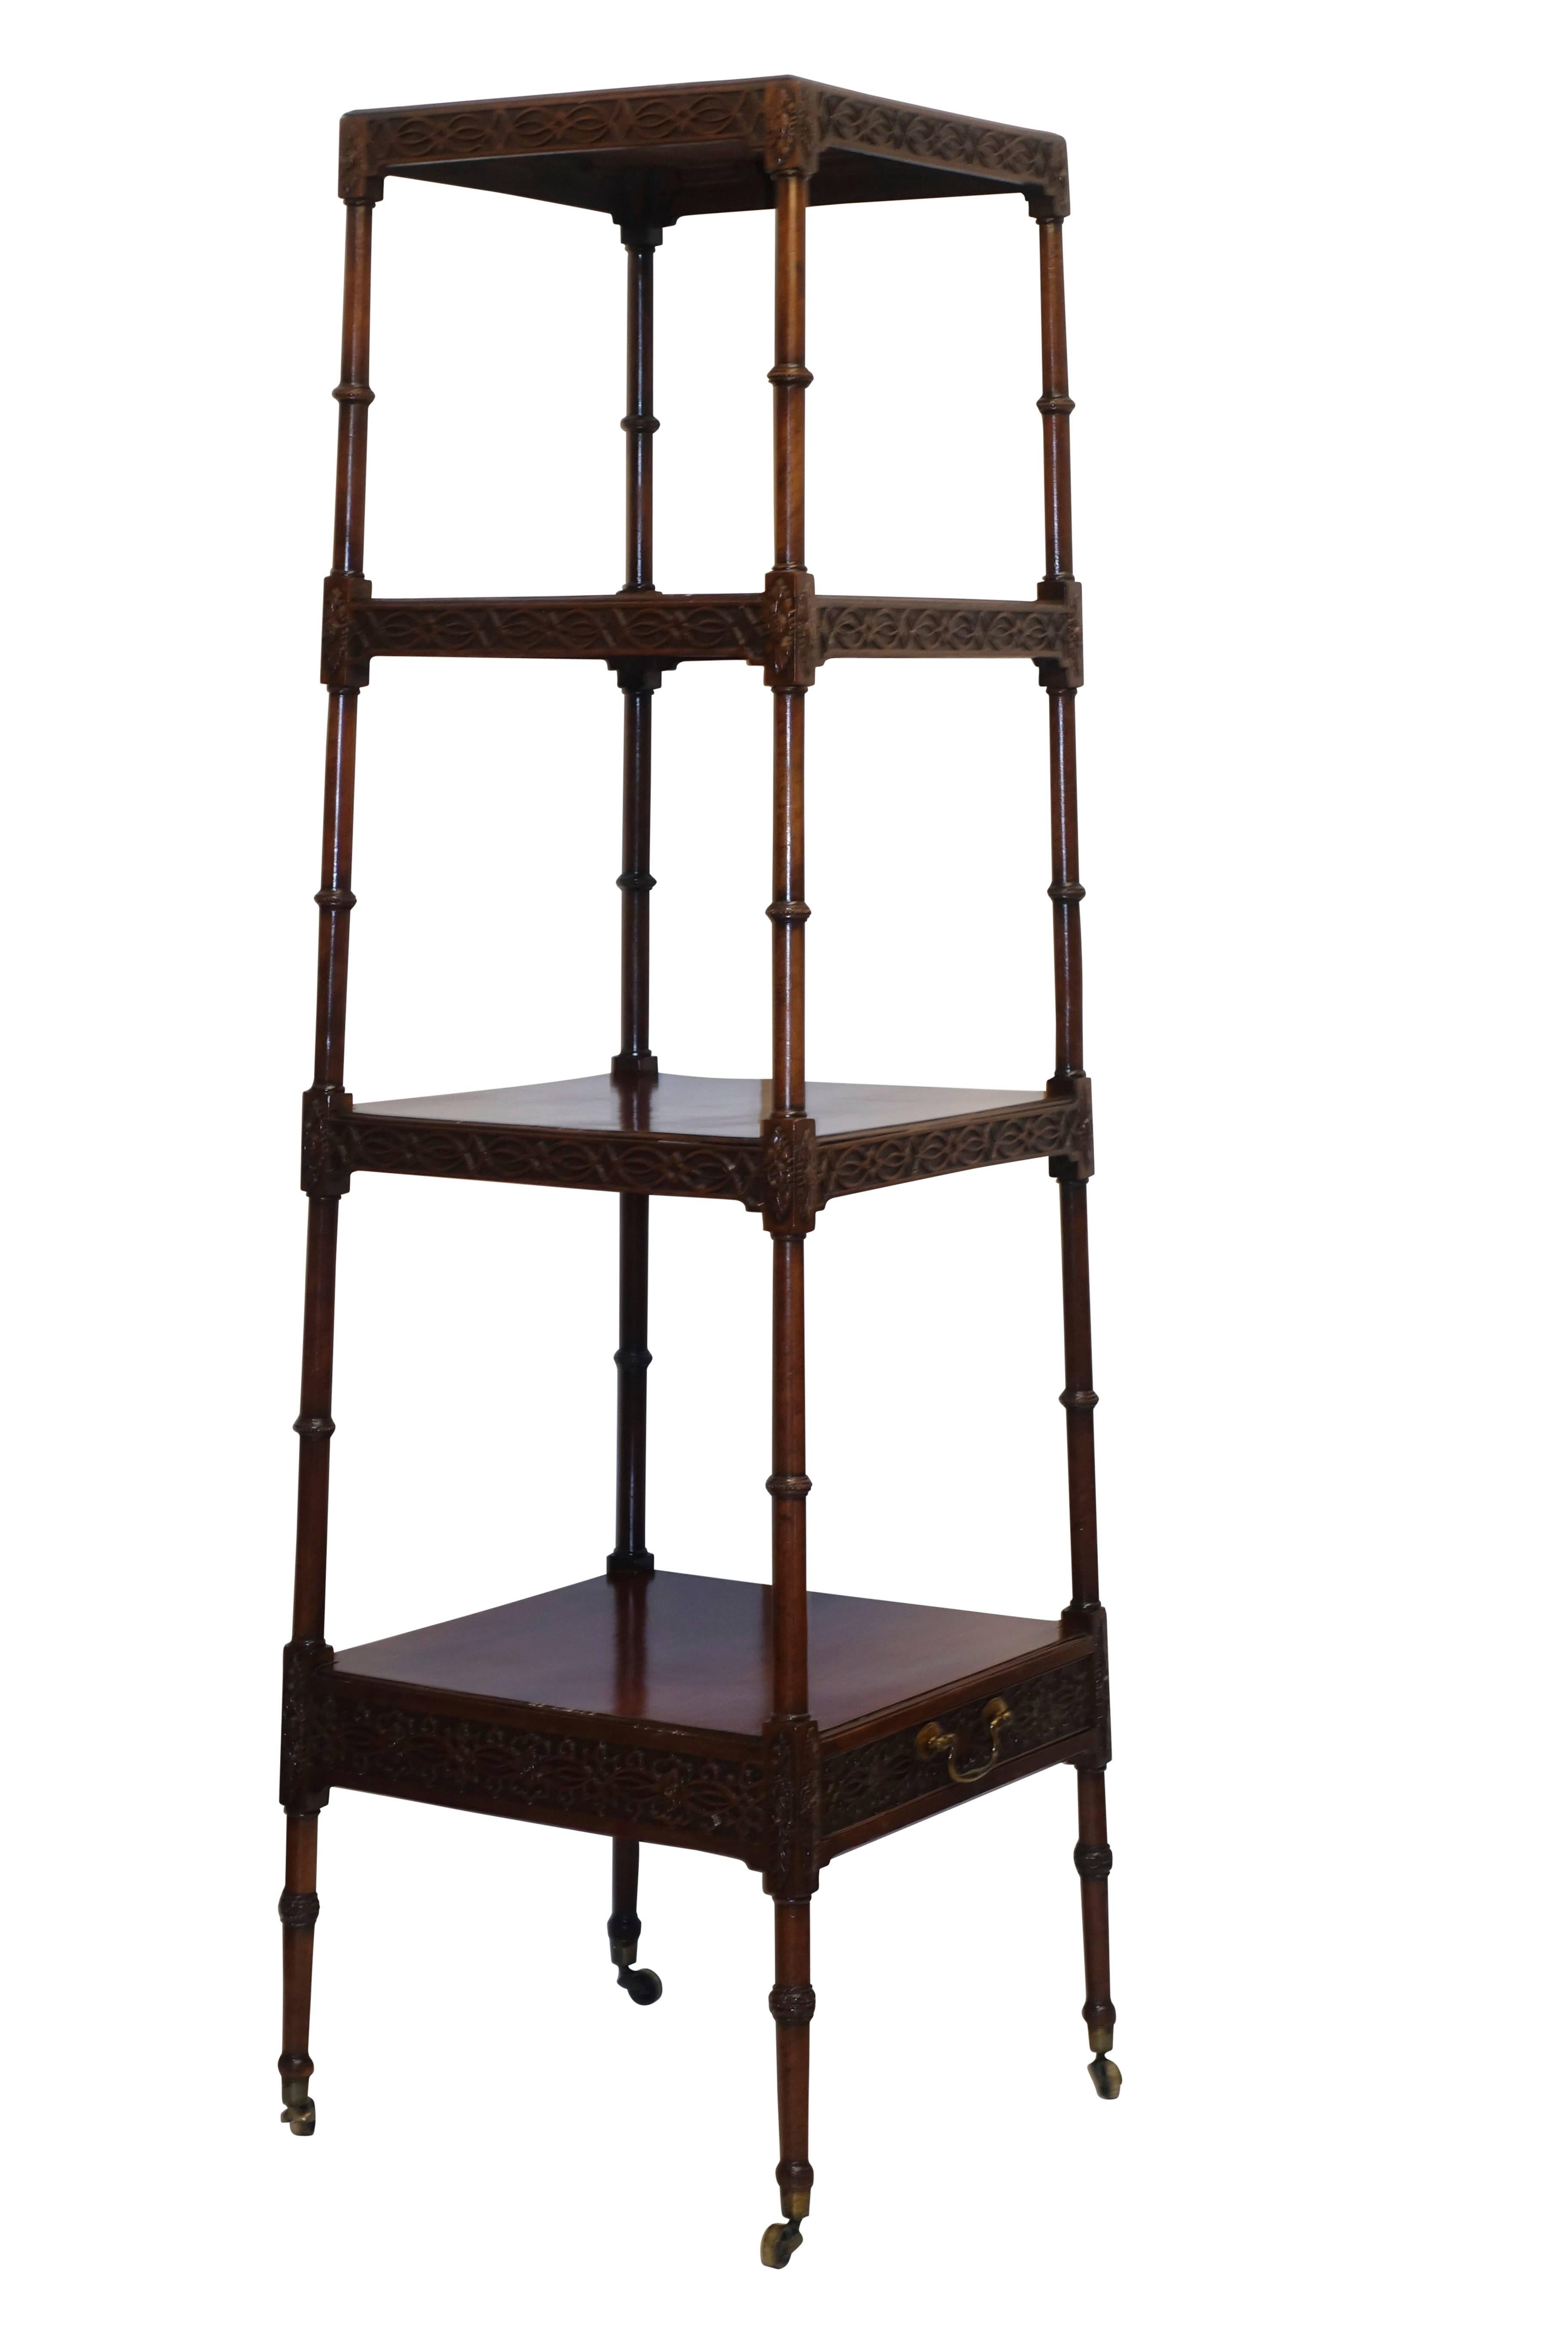 Unusual etagere with carved apron on the shelves and tapering turned supports from top to bottom, standing on the original brass casters, and having a single drawer under the lower shelf. England, circa 1830.